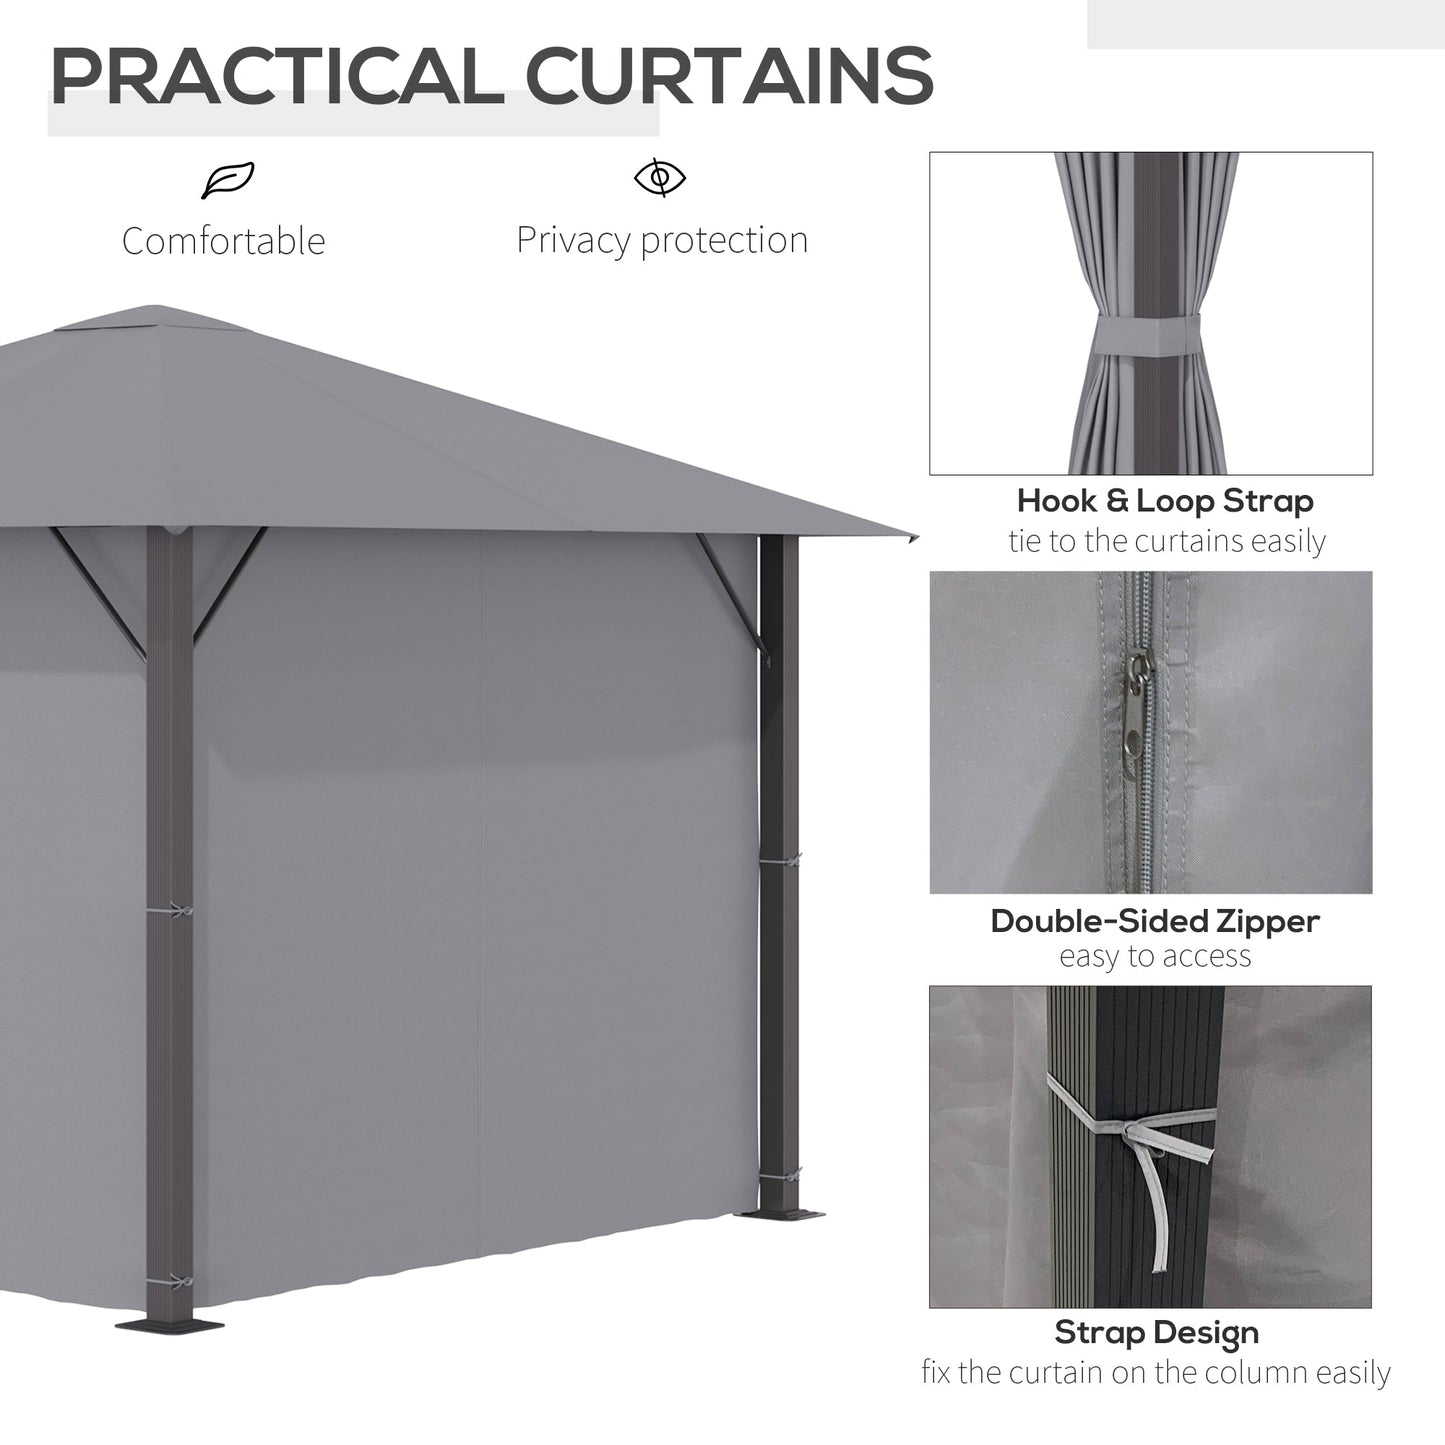 -Outsunny 10' x 10' Patio Gazebo Aluminum Frame Outdoor Canopy Shelter with Sidewalls, Vented Roof for Garden, Lawn, Backyard and Deck, Grey - Outdoor Style Company